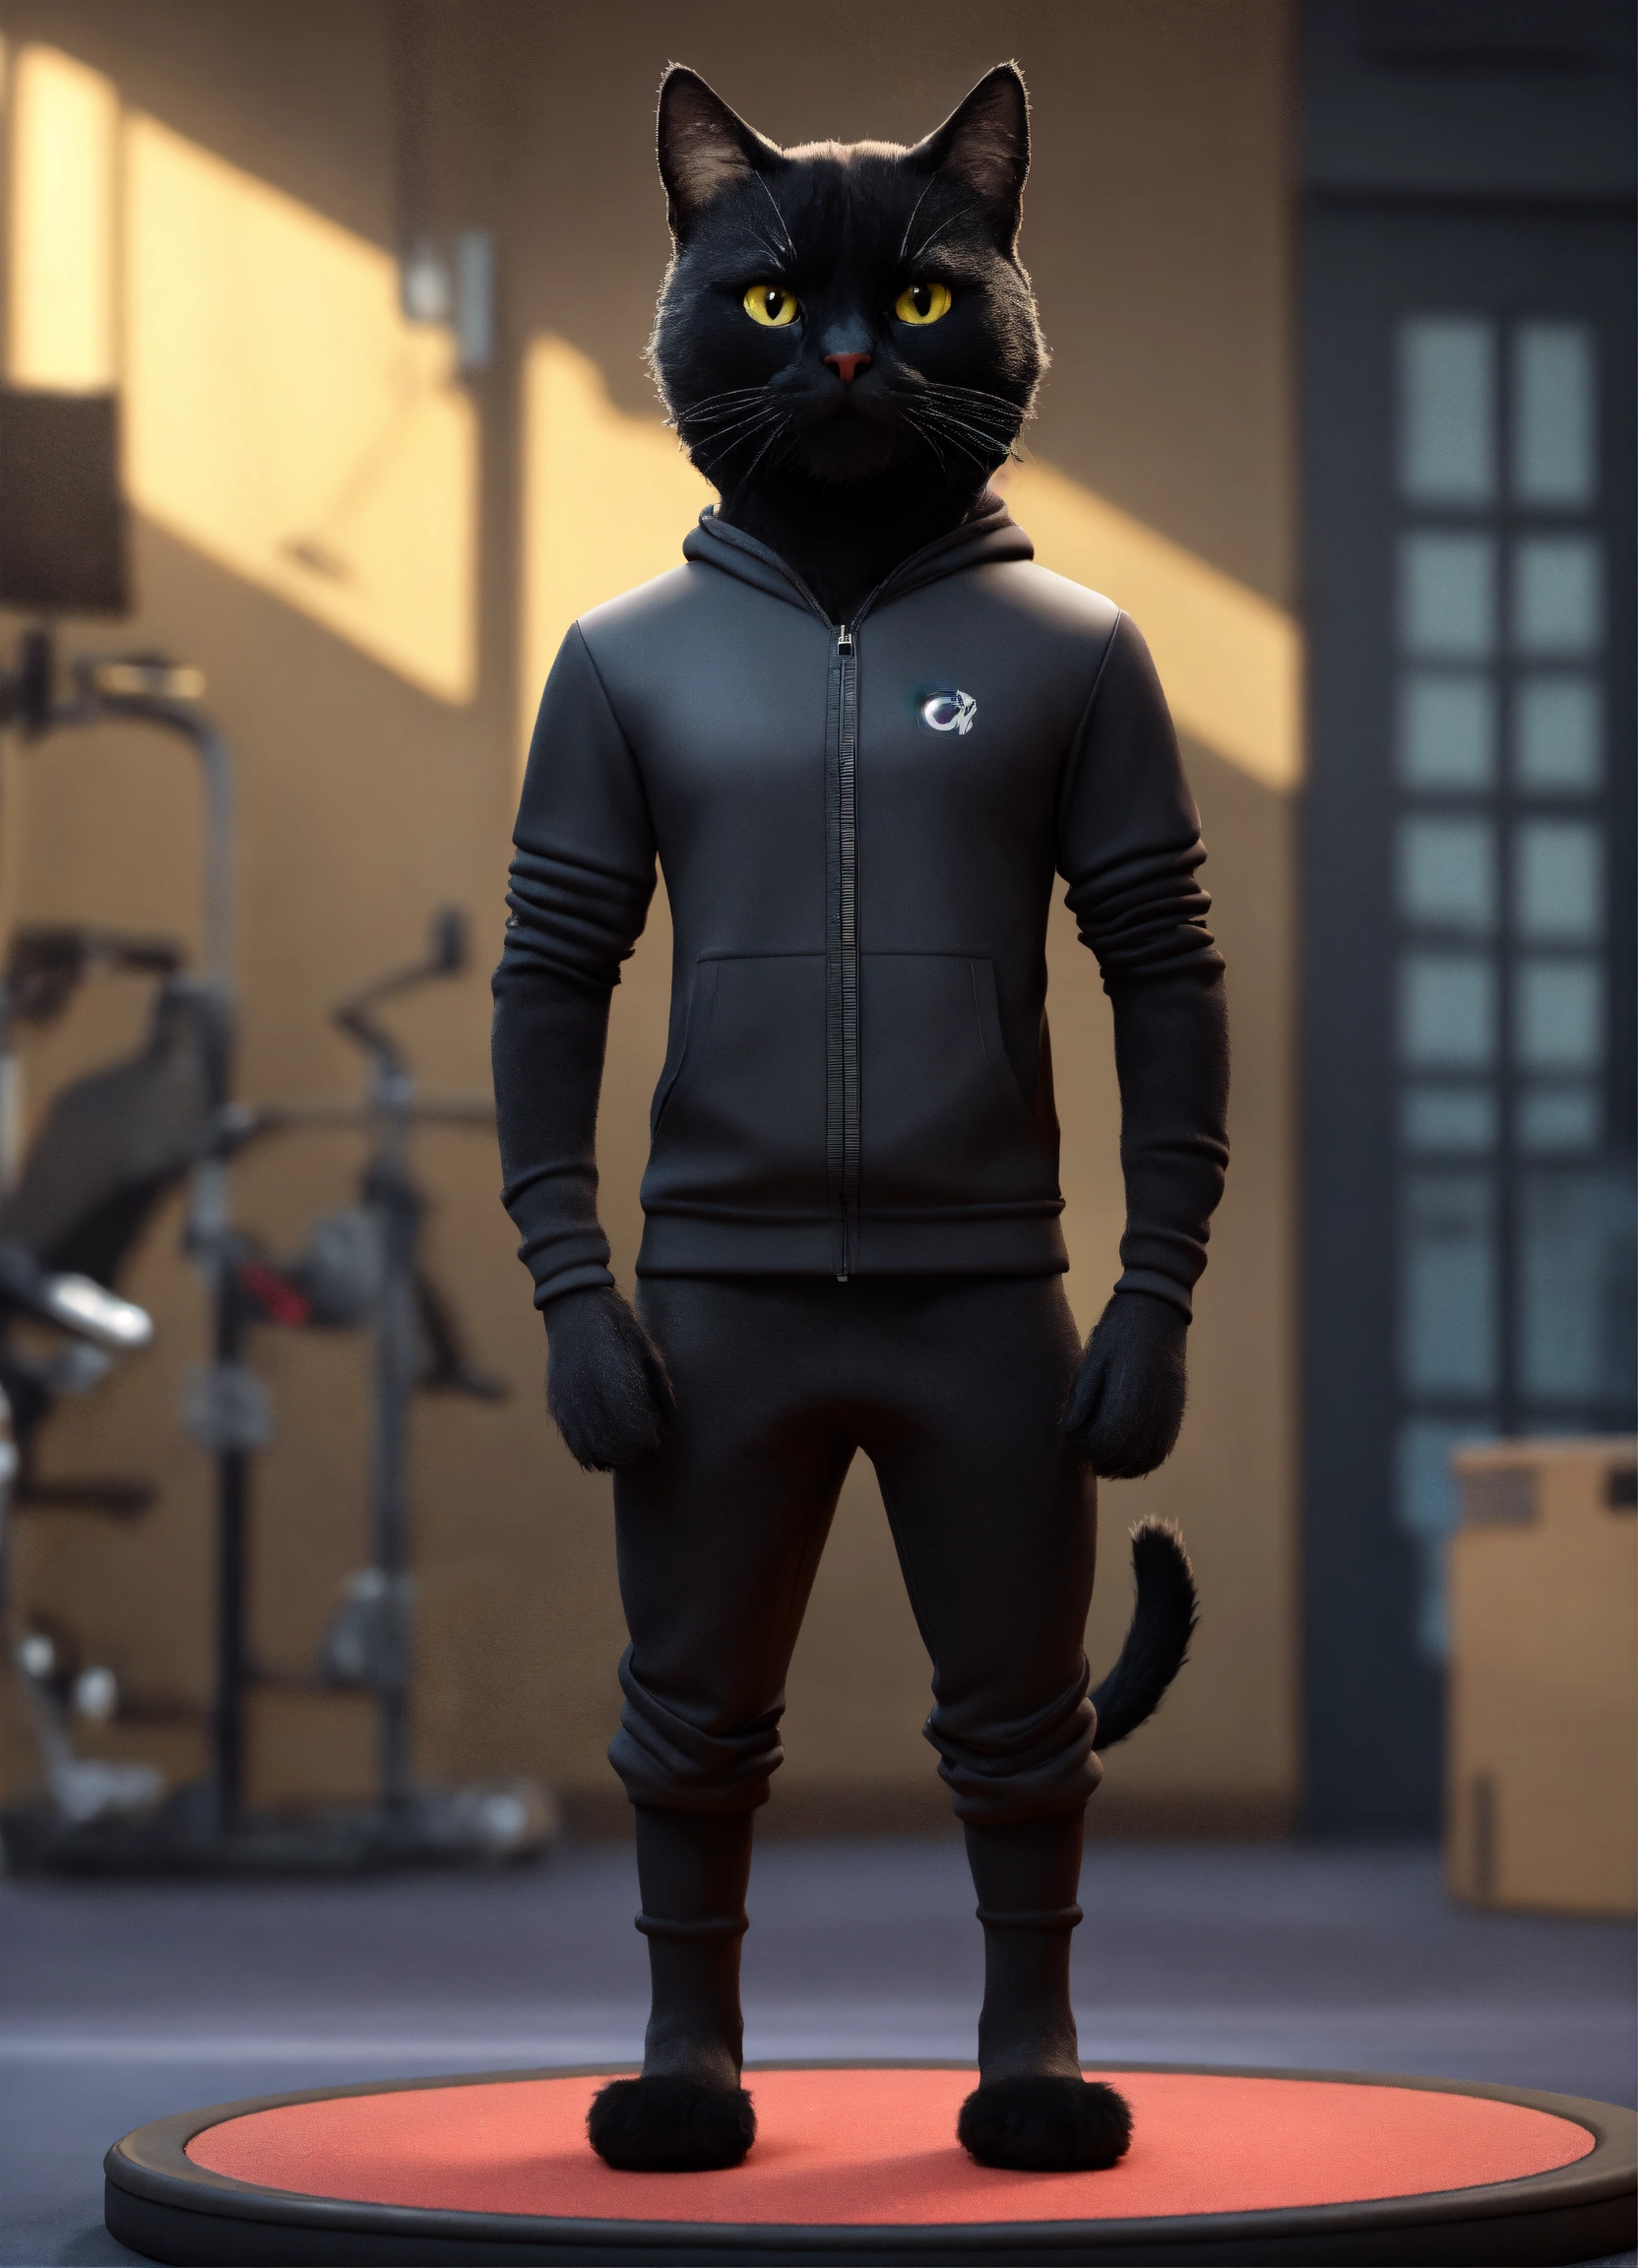 Lexica - A Black cat with fitness wear, like a Man, front view, studio  photo, hyper realistic, fashion, photorealistic, 3d render, Disney style